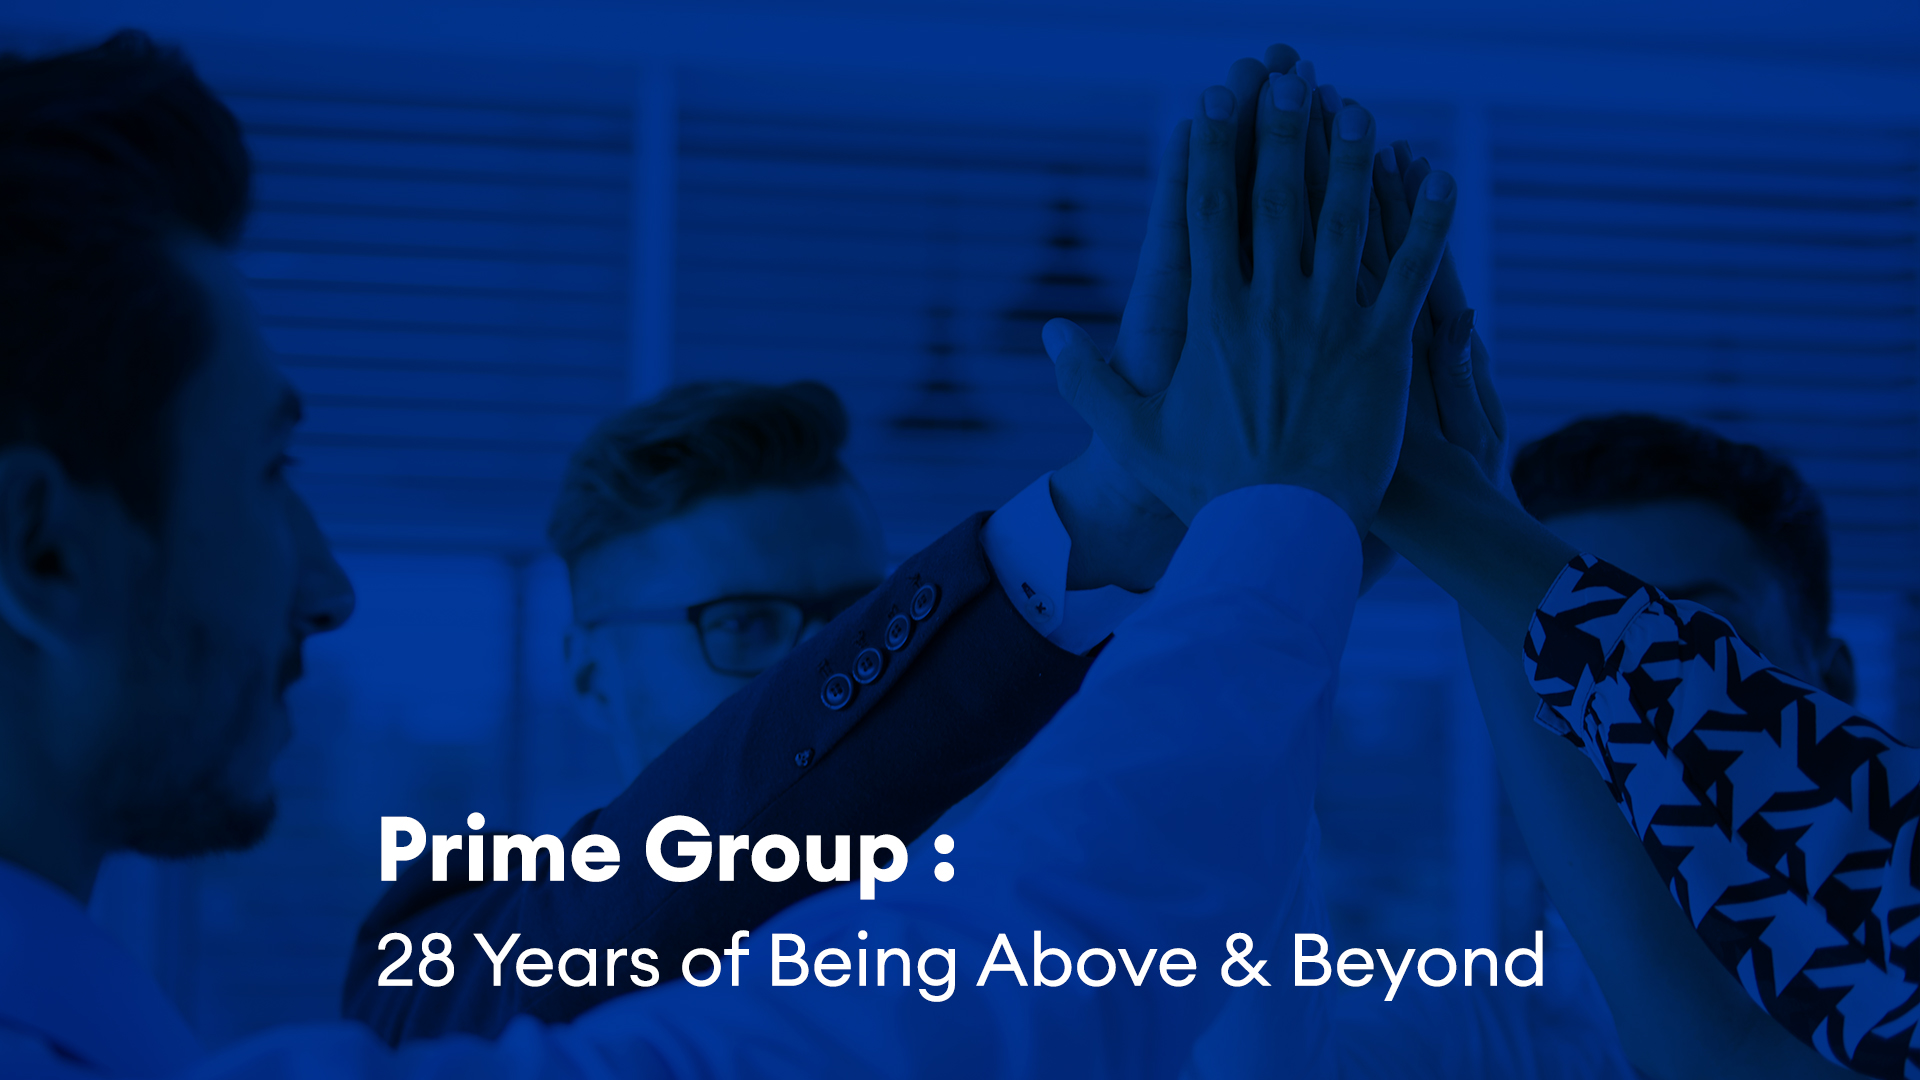 Prime Group: 28 Years of Being Above & Beyond